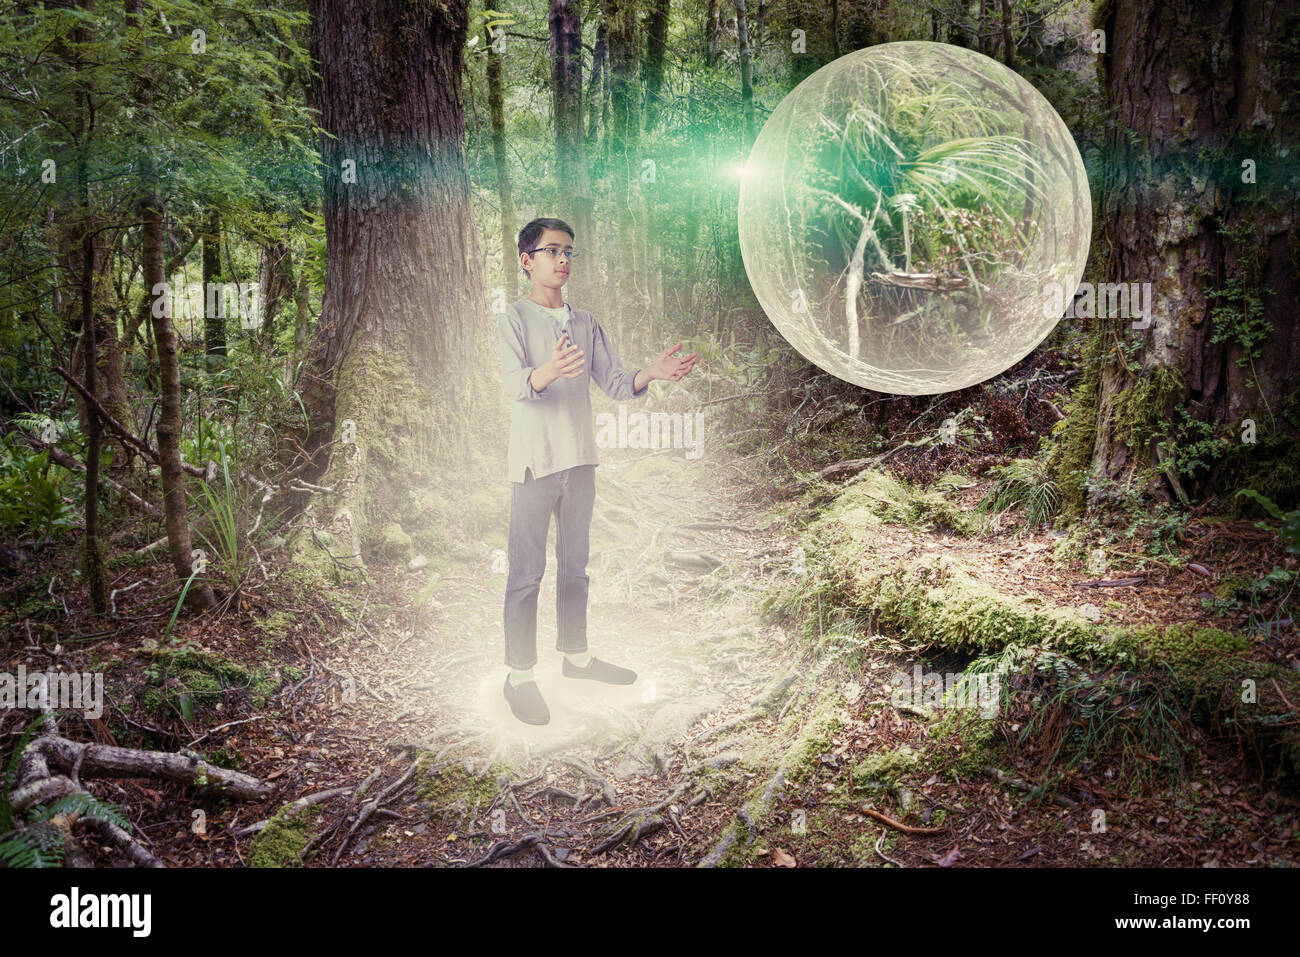 Mixed race boy admiring glowing orb in forest Stock Photo